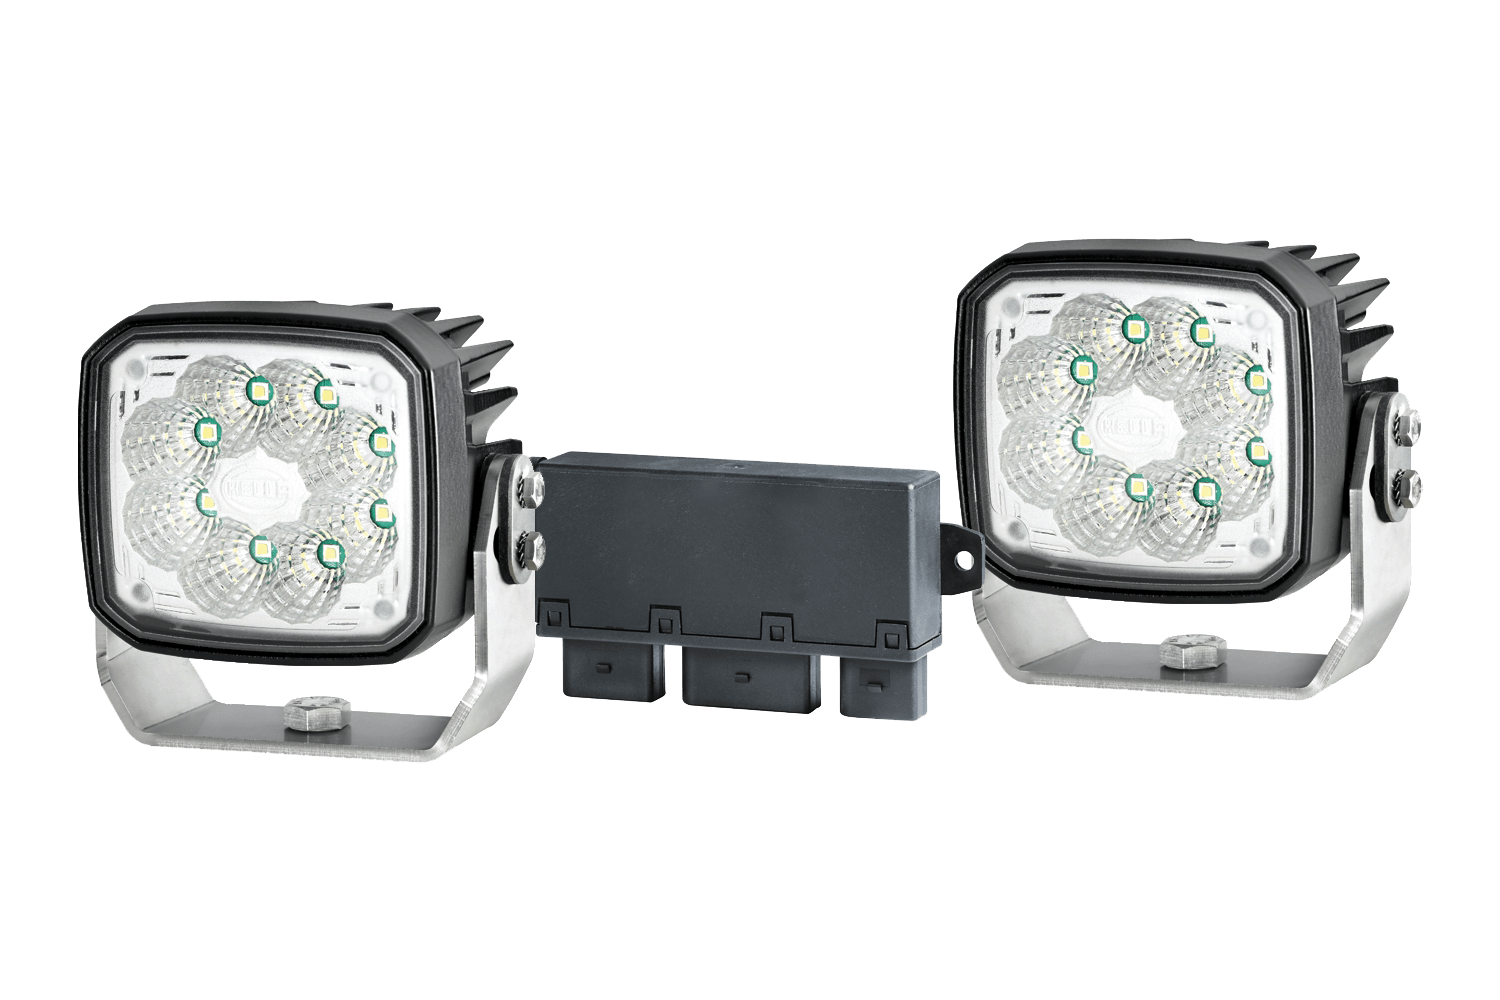 SMART Cornering Light from Hella offered by Patlon